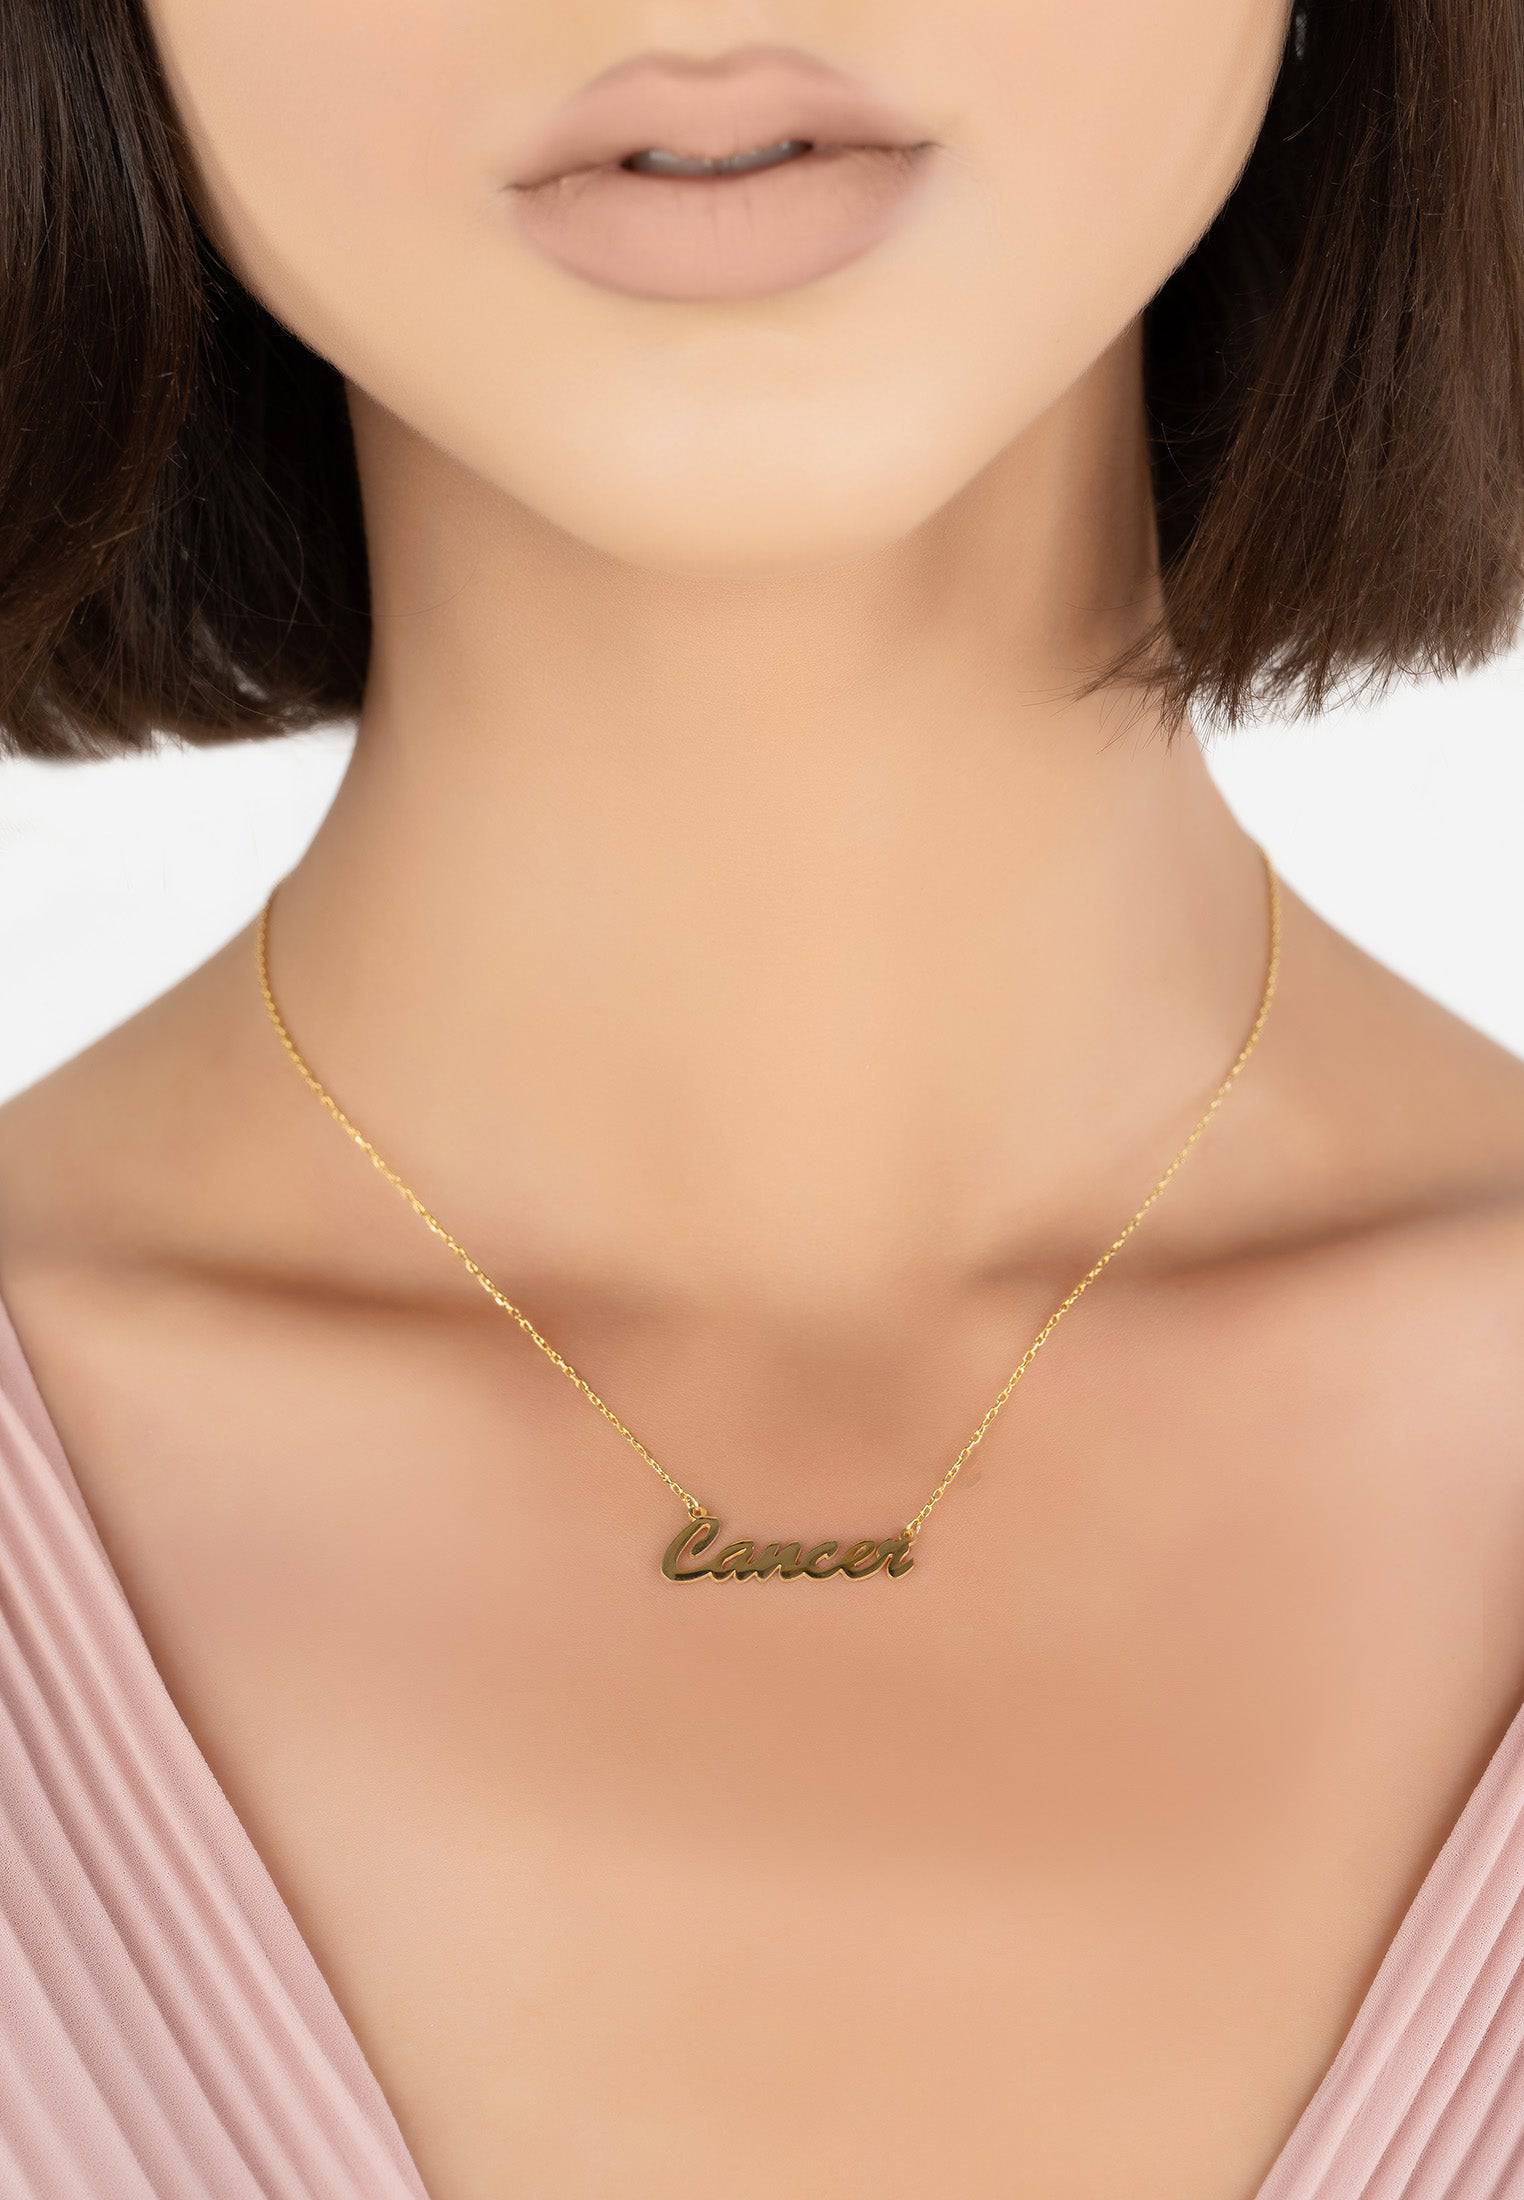 Gold Cancer Zodiac Name Necklace - Personalized Gift Idea for June 21 - July 22 Birthdays Bijou Her